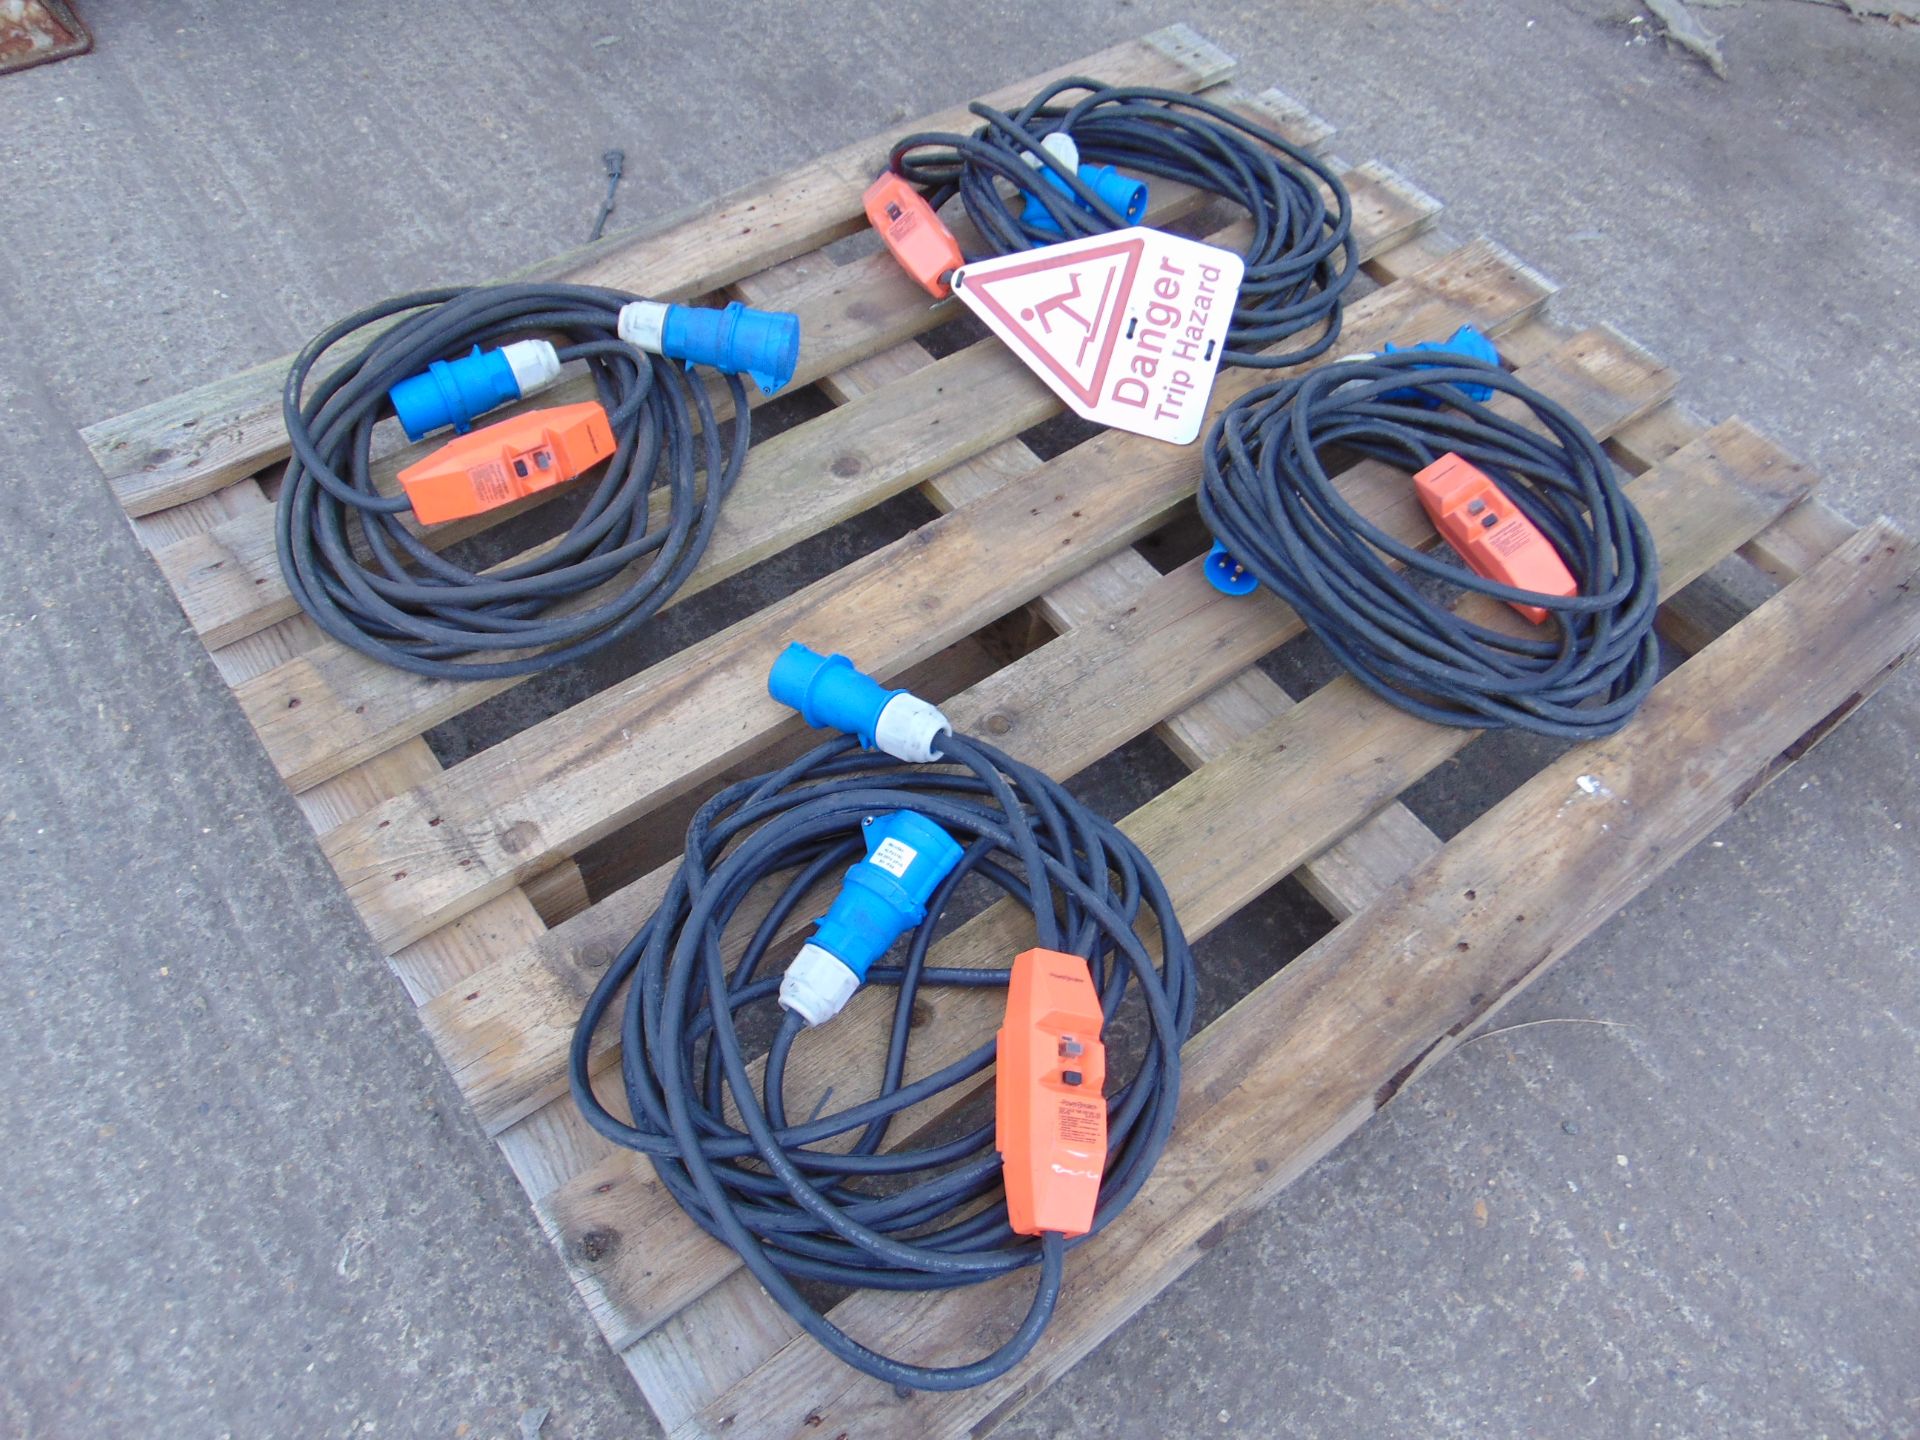 4 x Electric Cable Assys C/W Plugs & Heavy Duty In Line PowerBreakers - Image 2 of 5